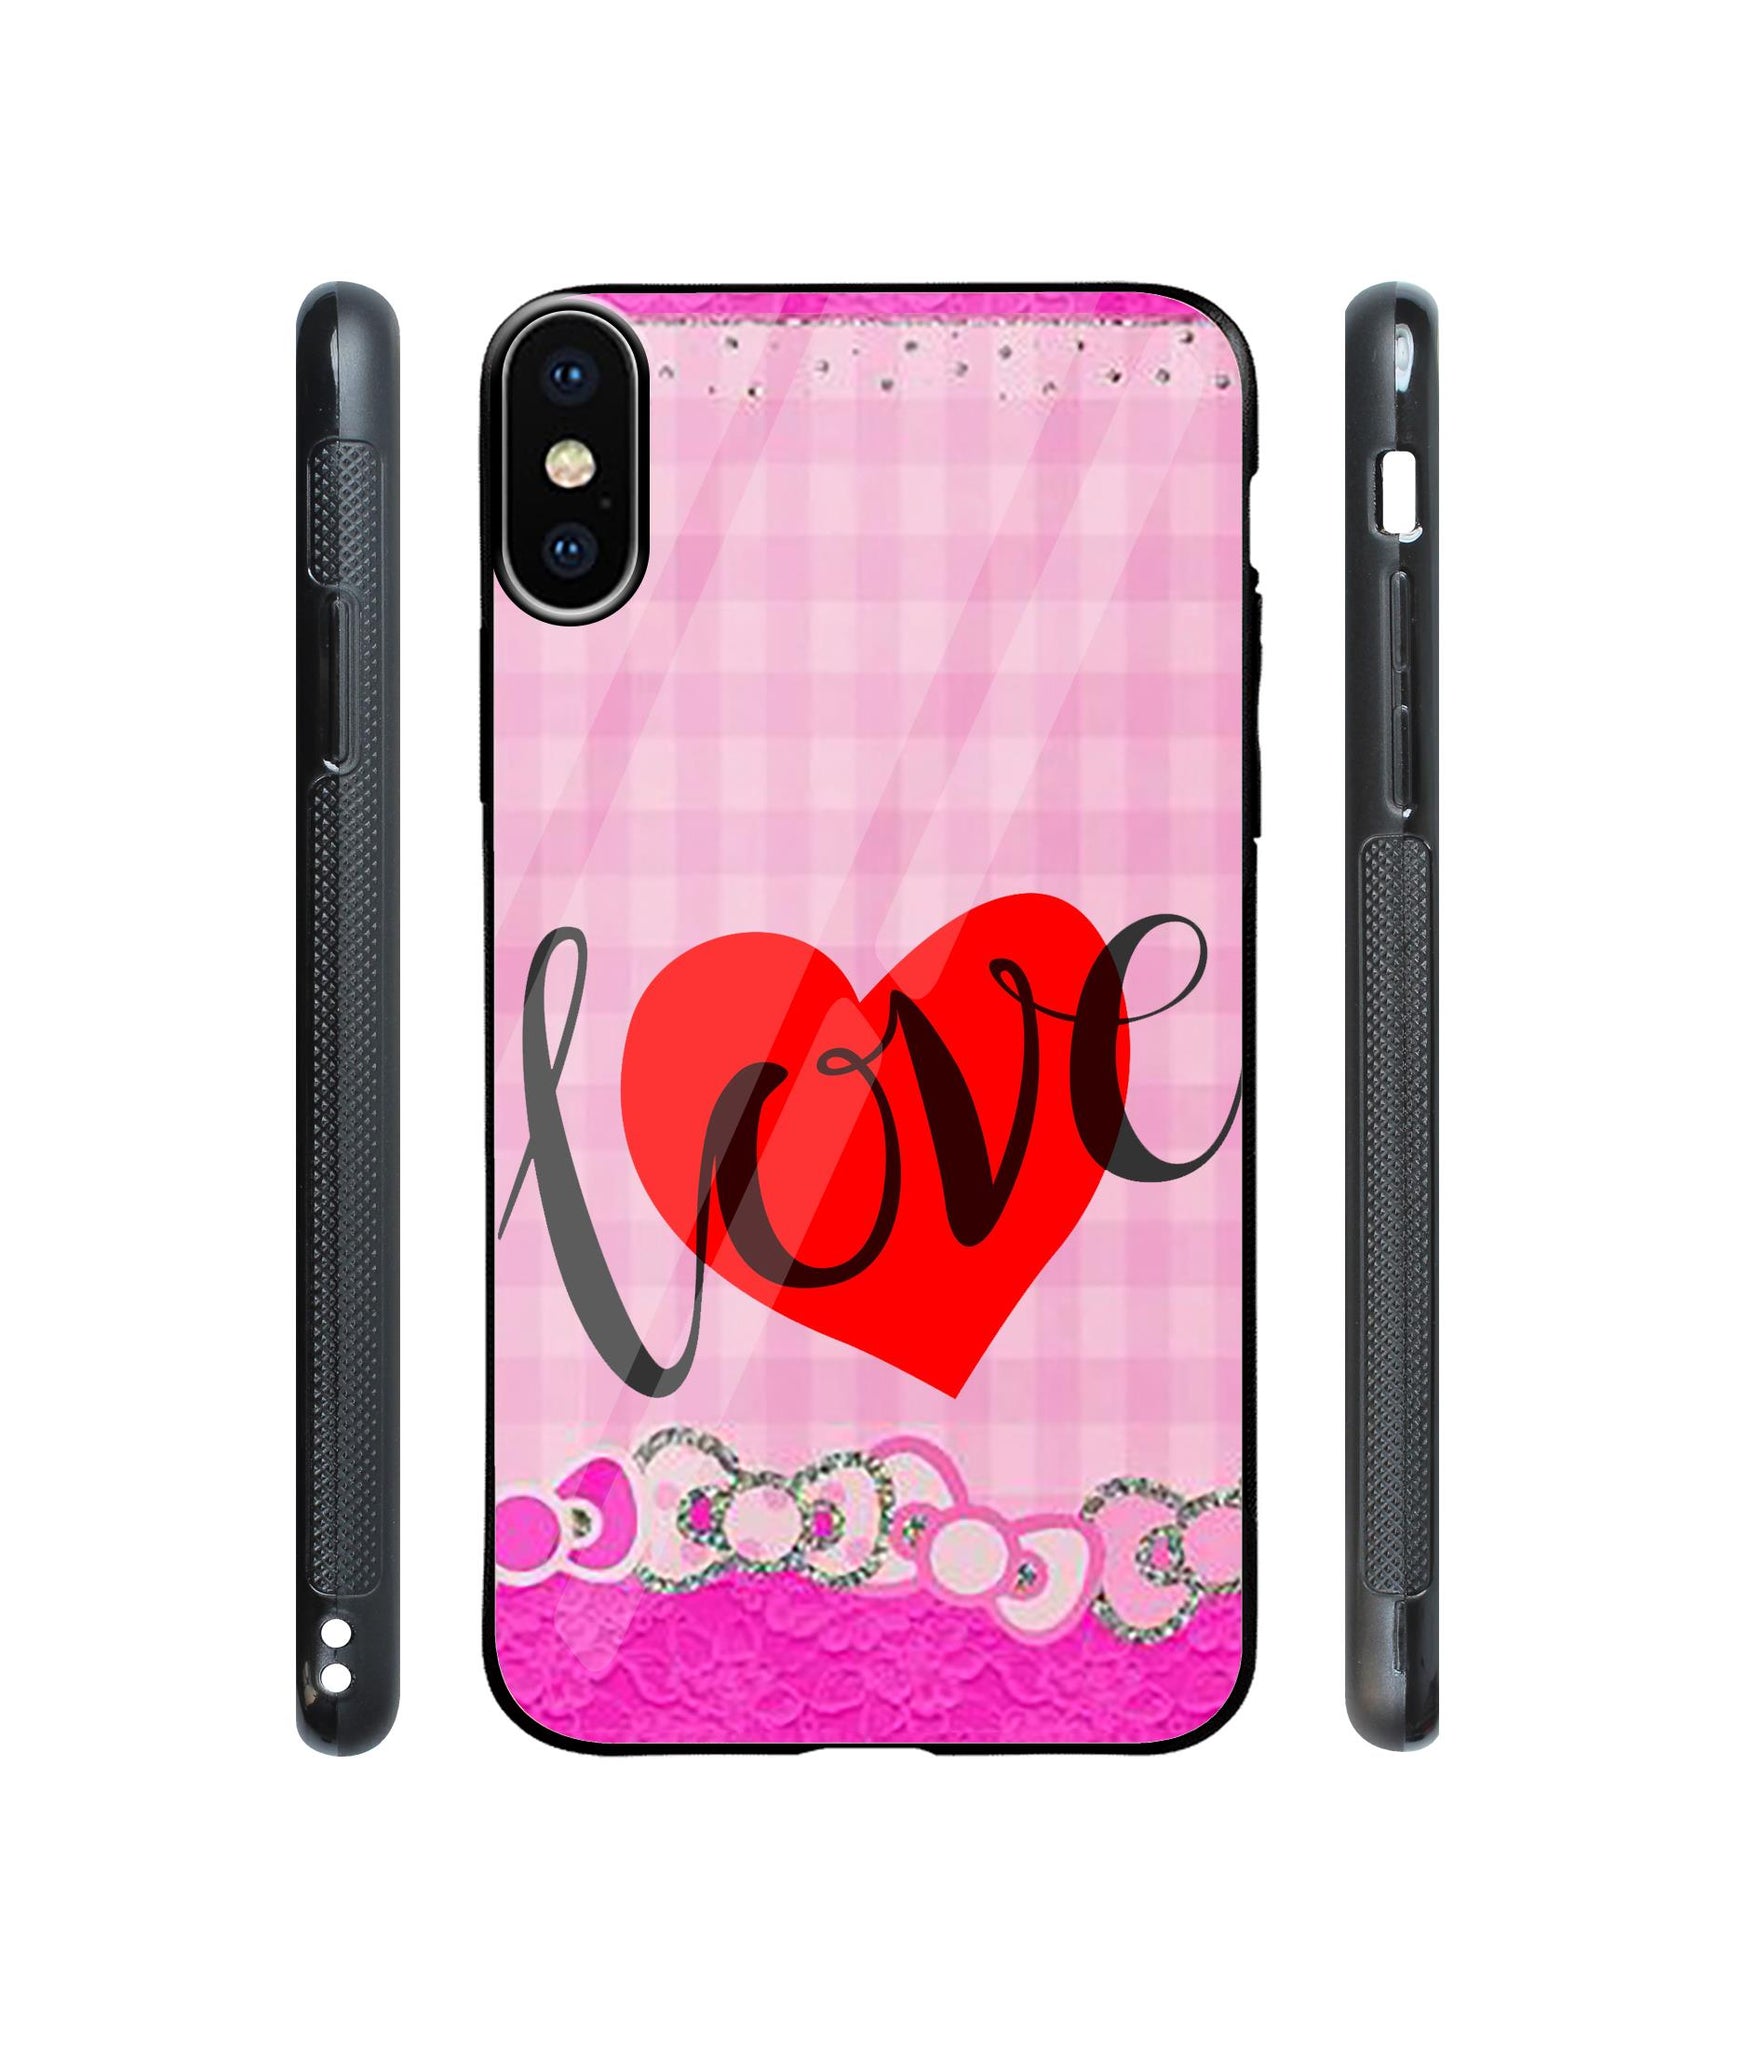 Love Print On Cloth Designer Printed Glass Cover for Apple iPhone X / Xs